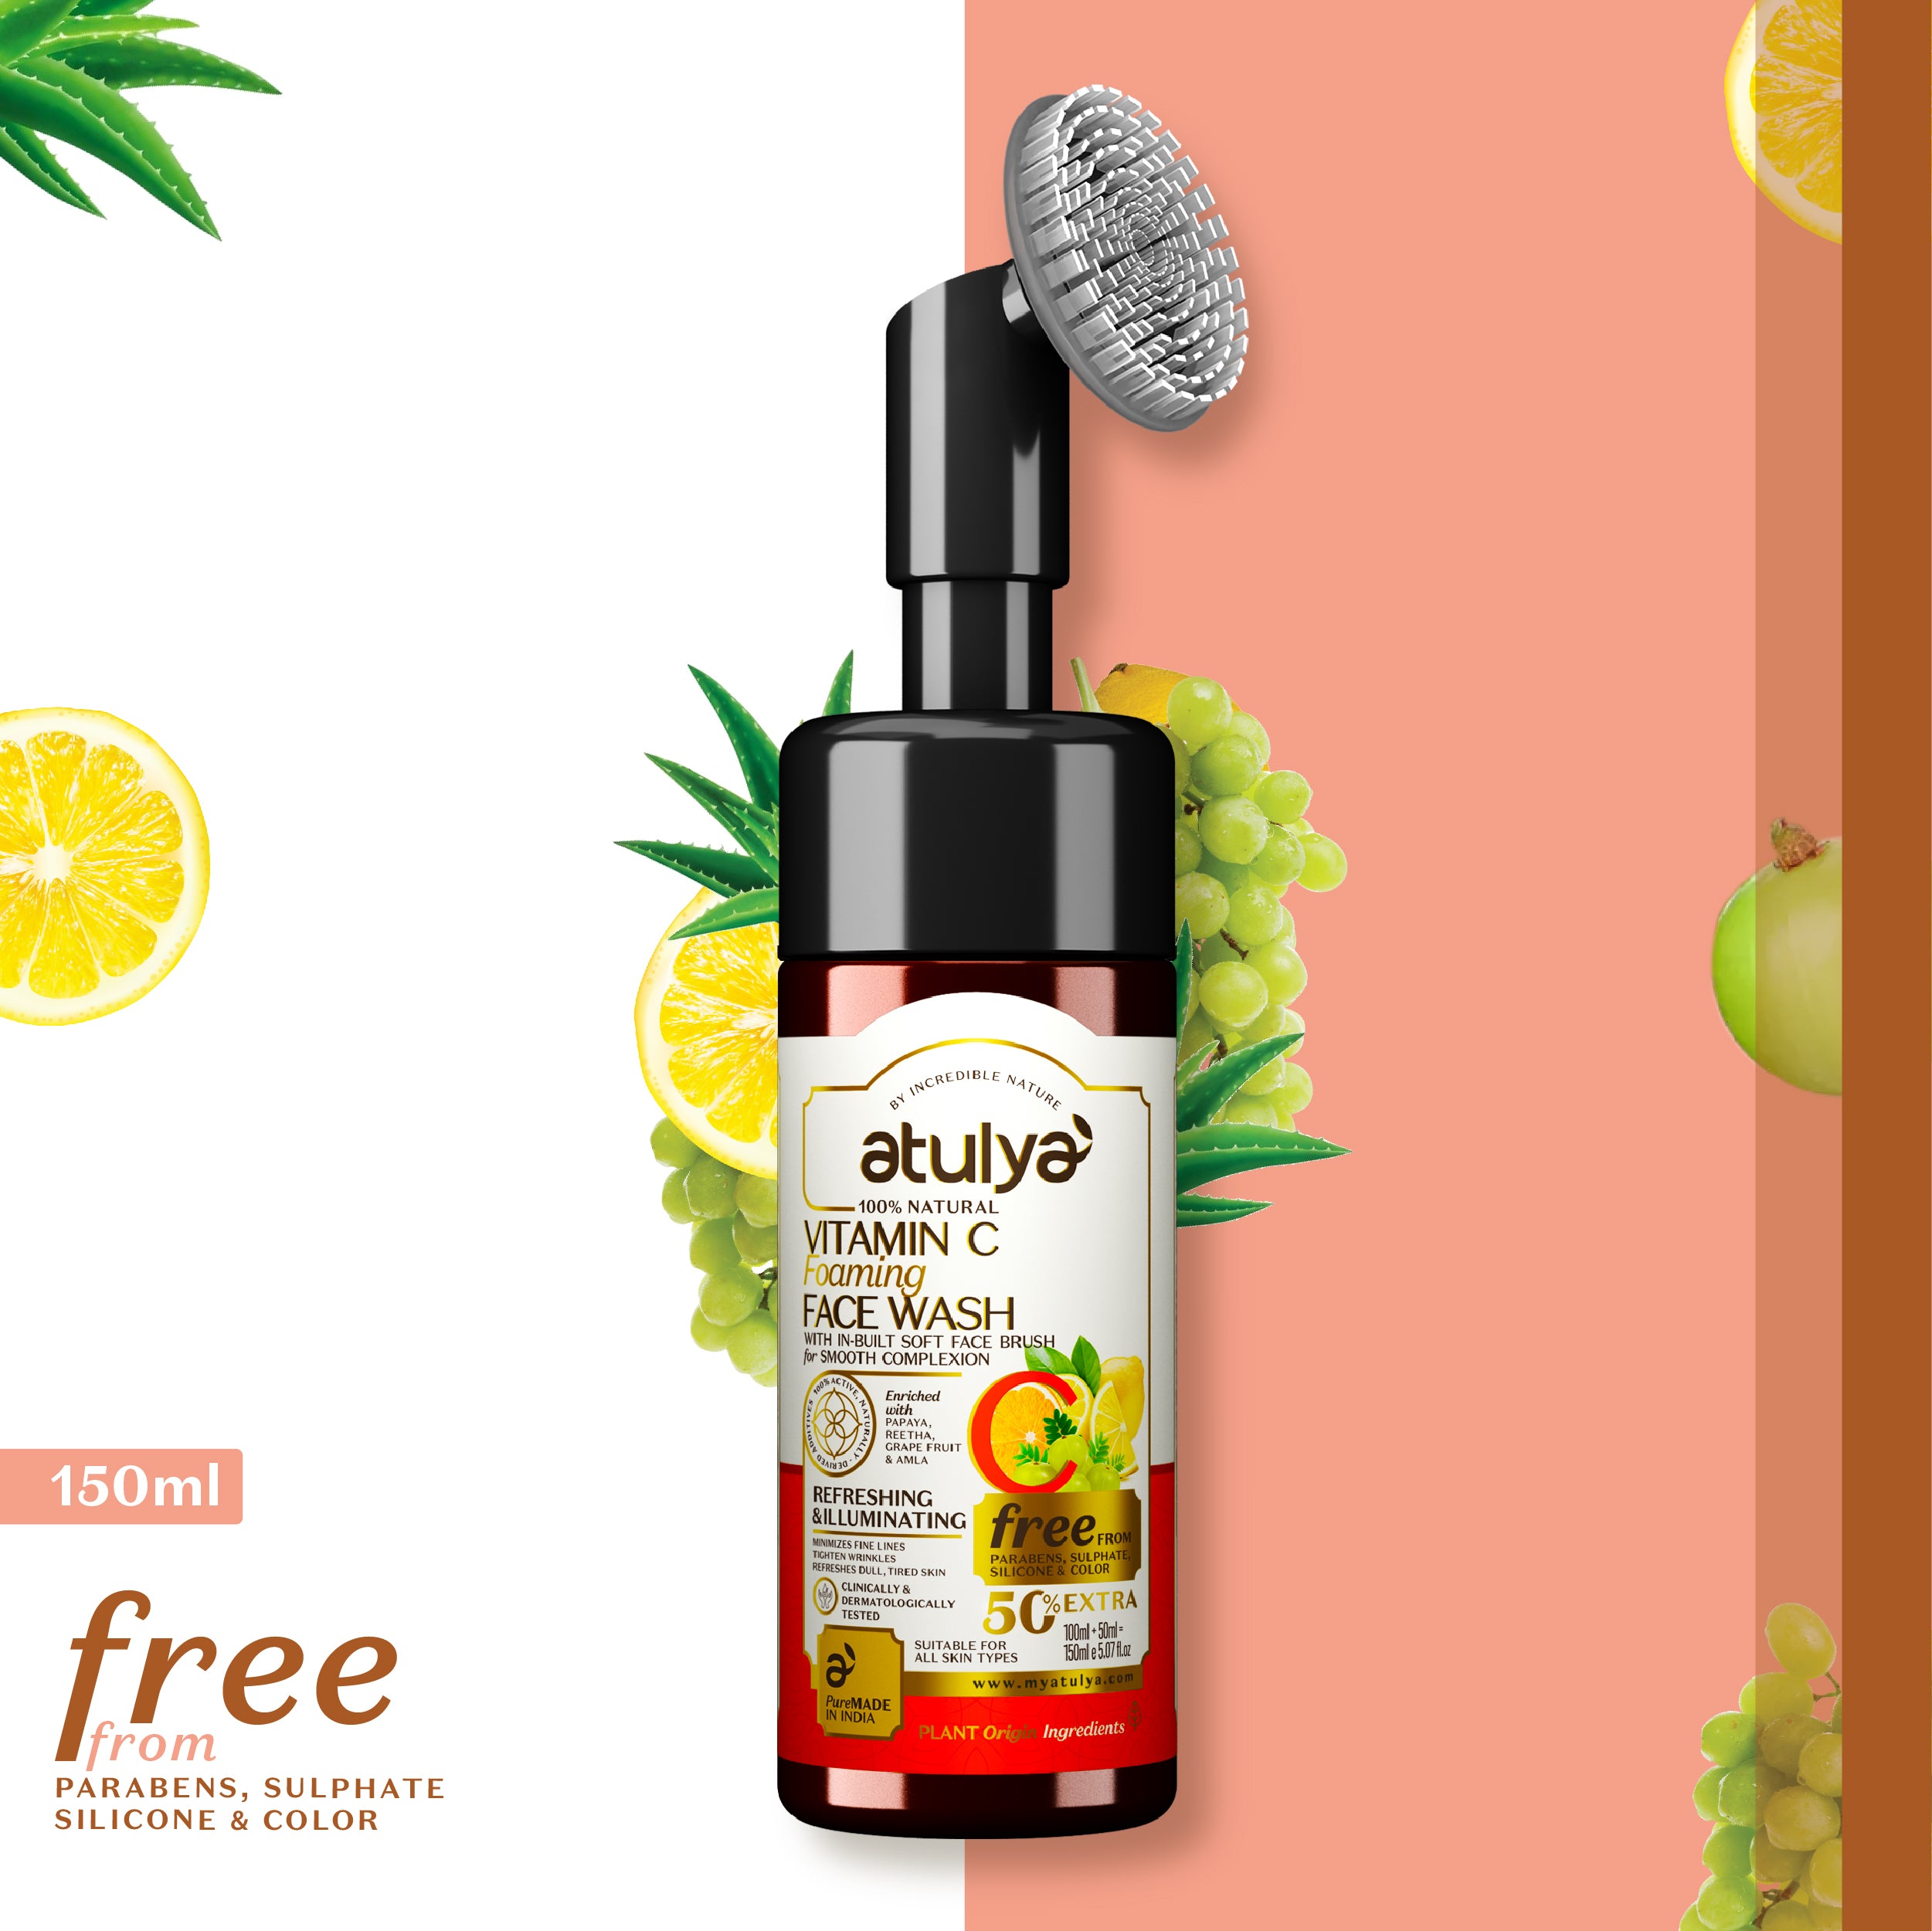 atulya Vitamin C Foaming Face Wash with Silicone Brush for Fresh & Glowing Skin